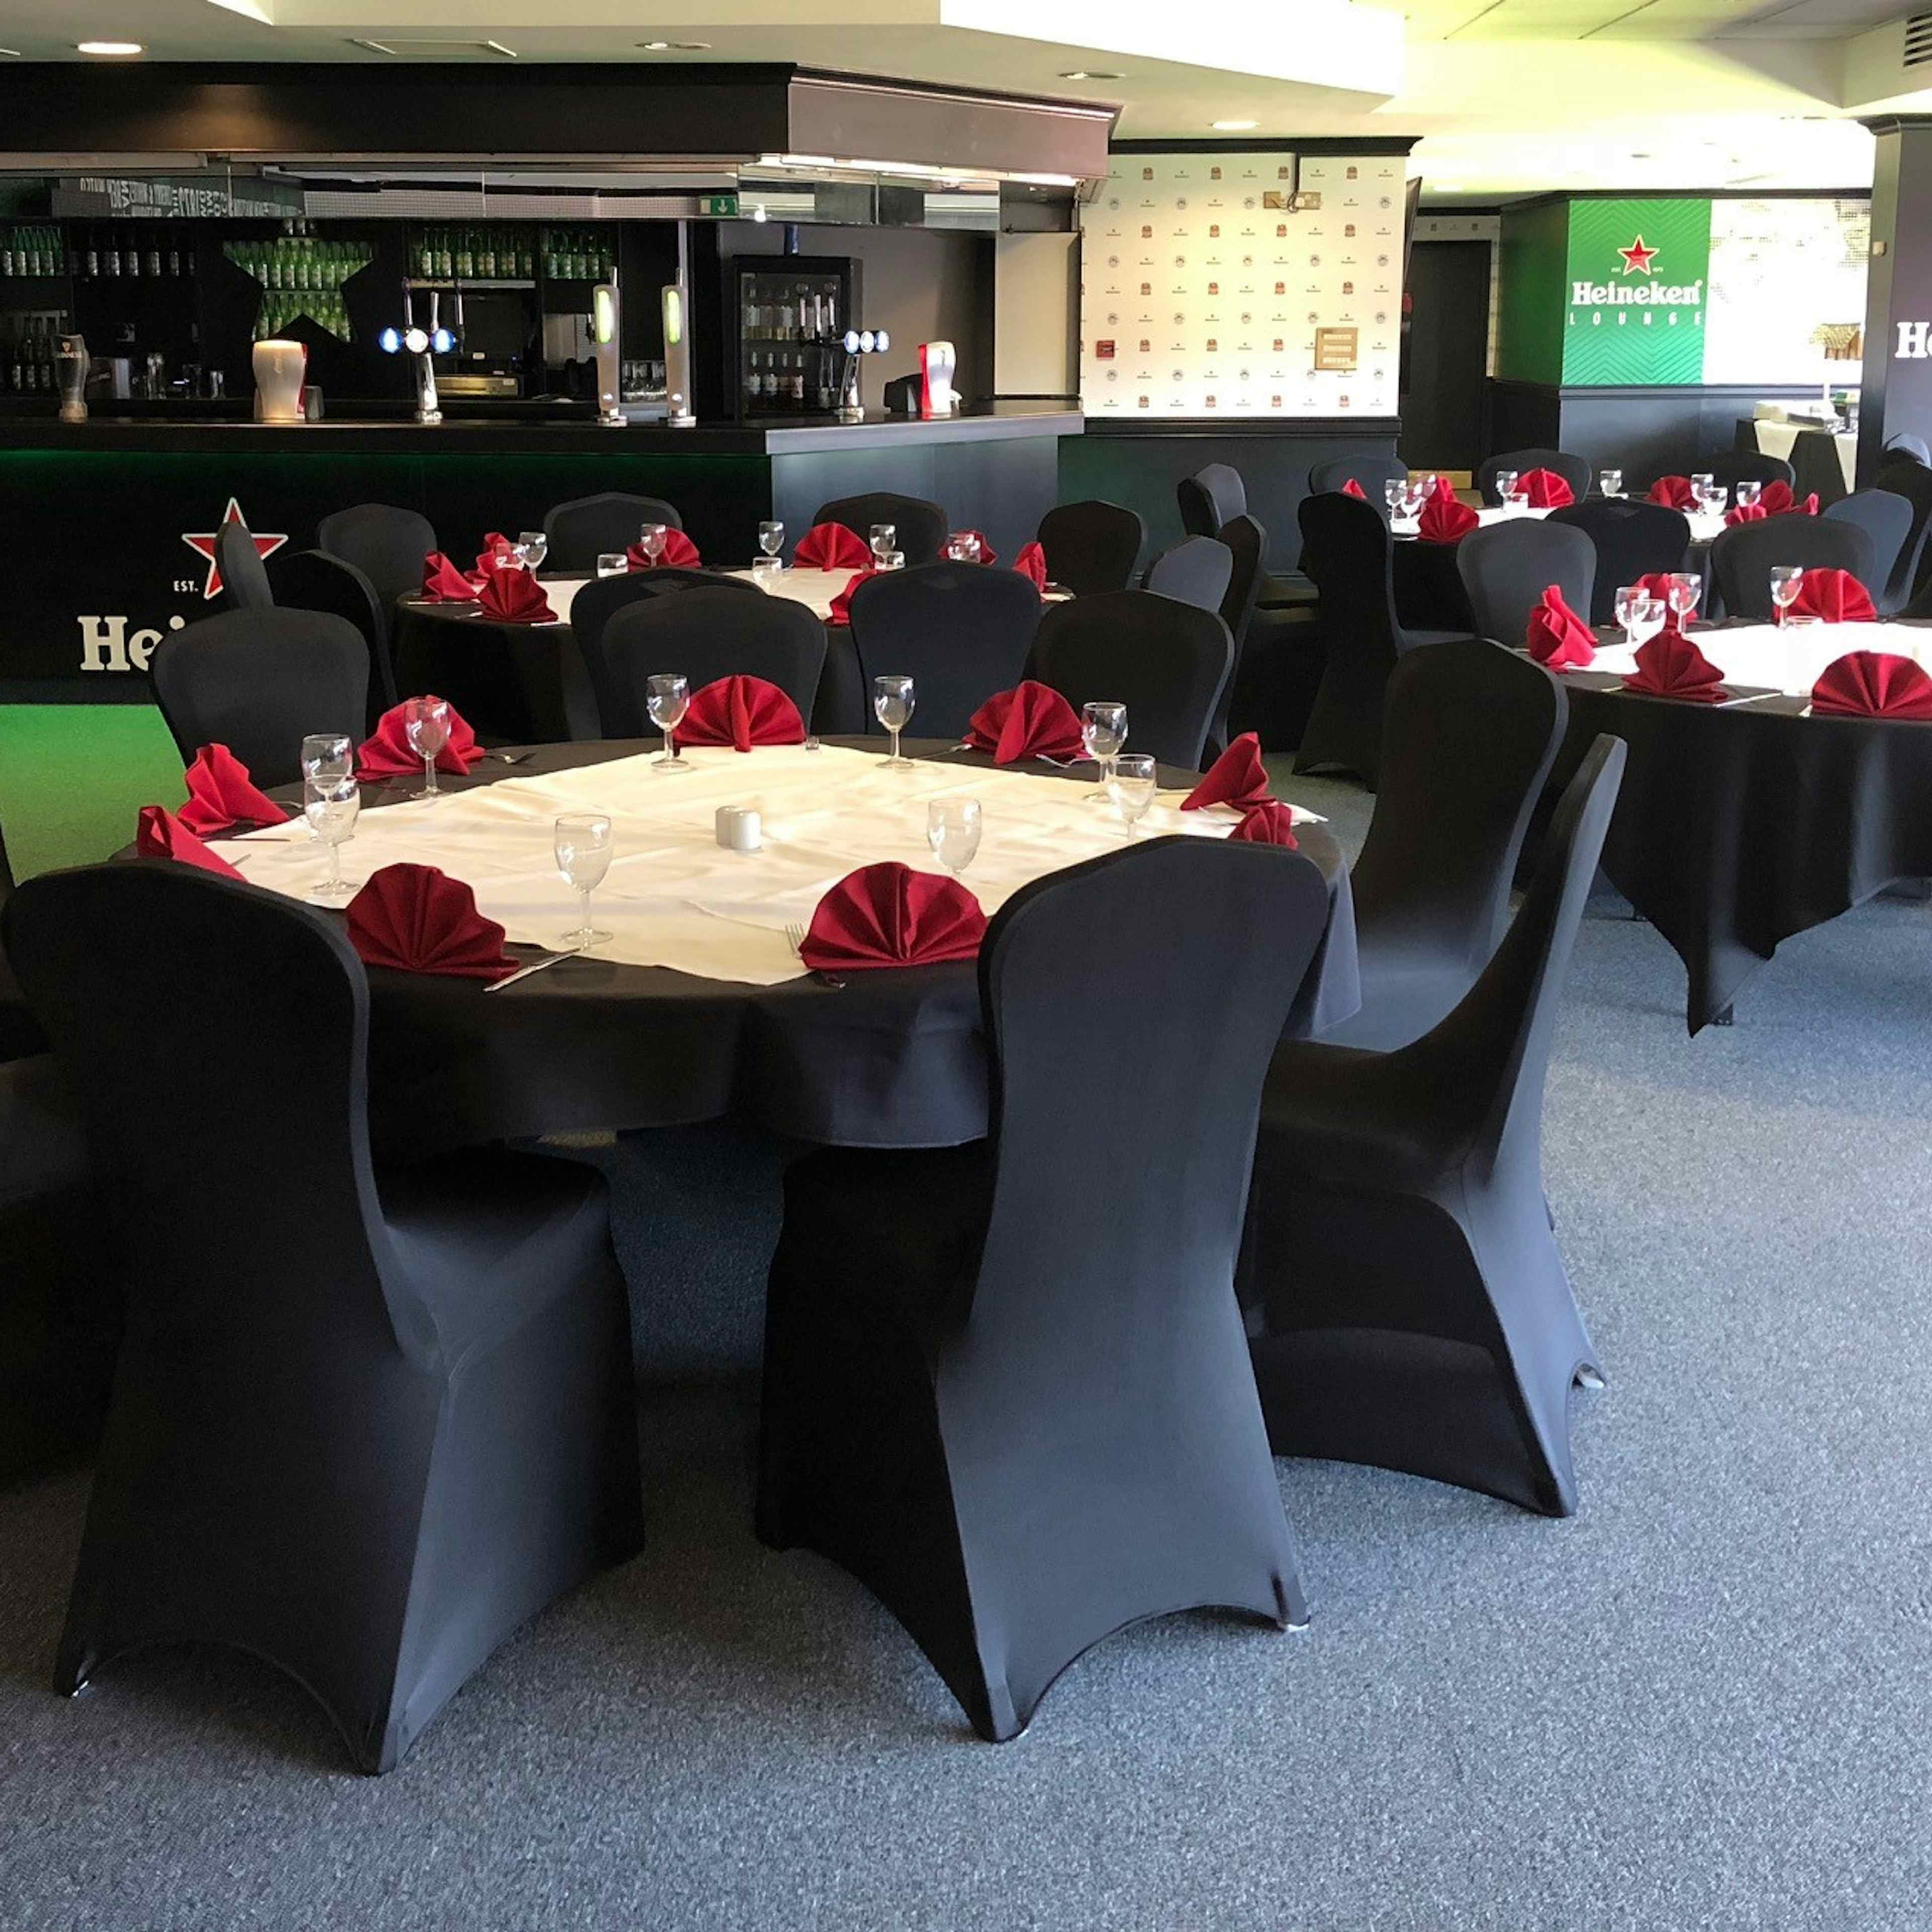 The DW Stadium - The Carling Lounge image 2